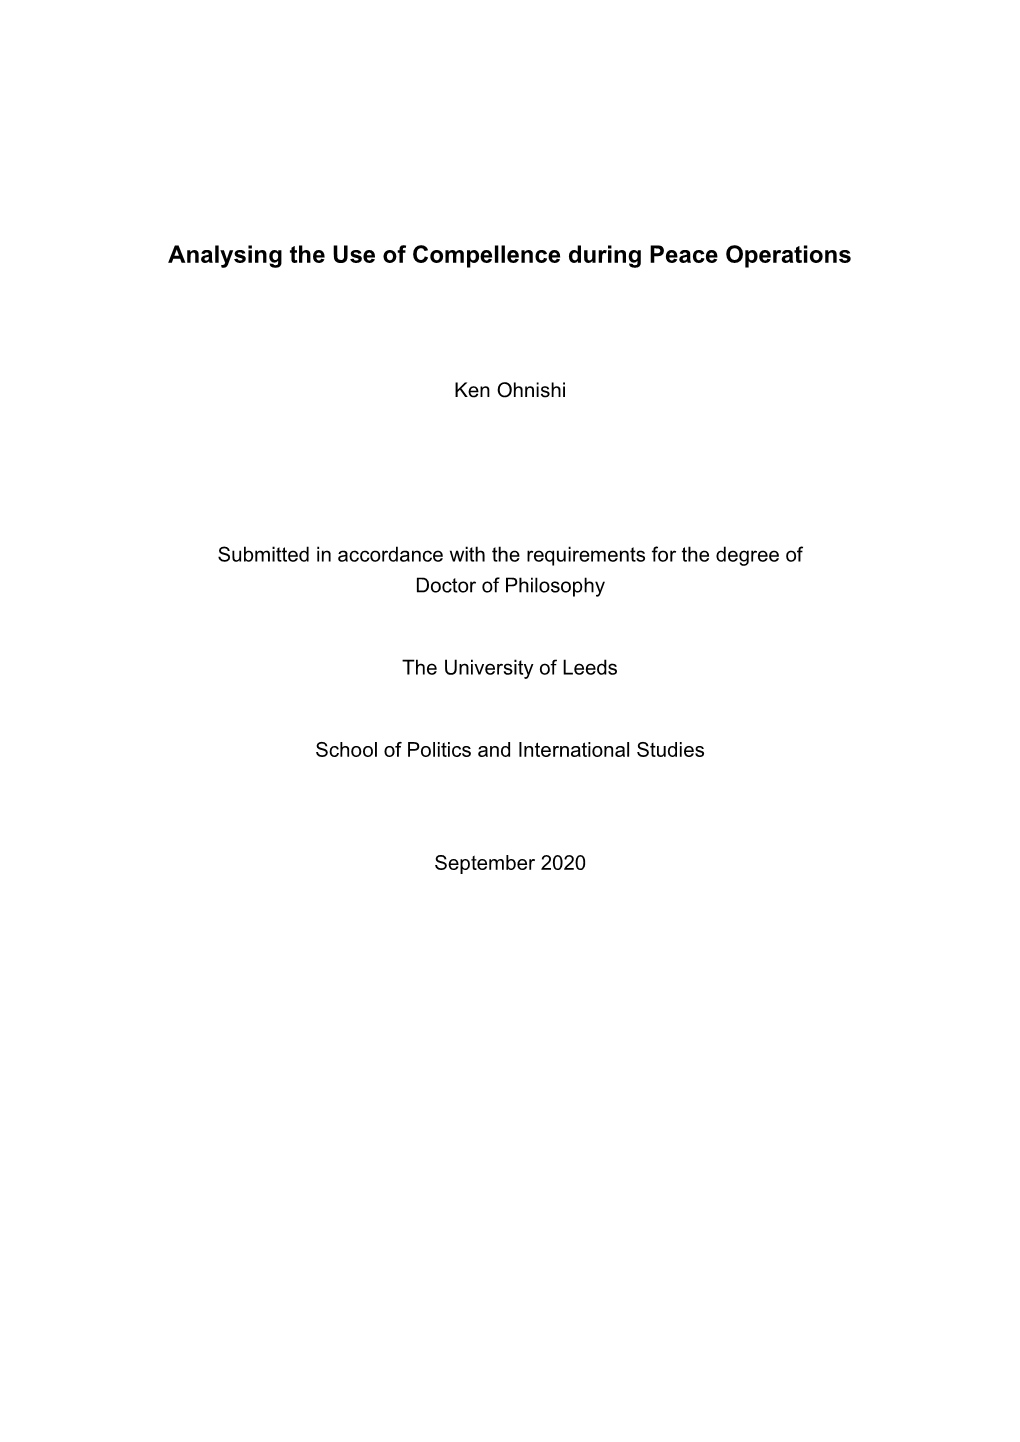 Analysing the Use of Compellence During Peace Operations